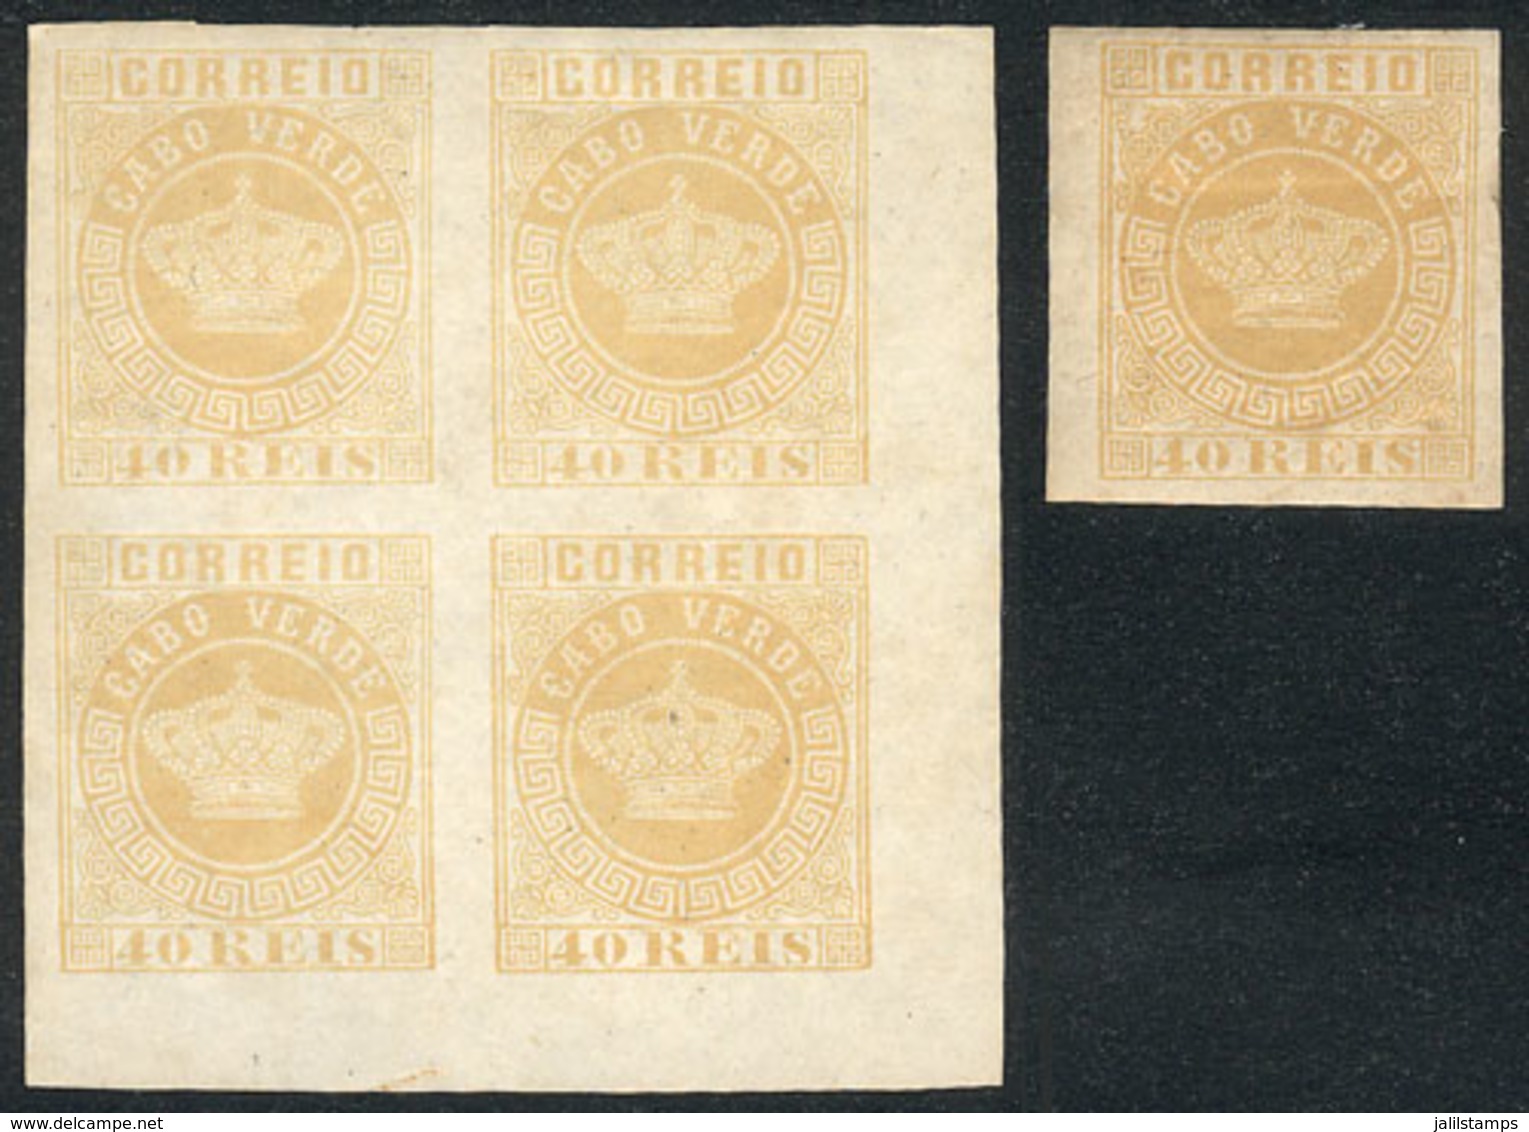 CAPE VERDE: Sc.13a, 1881/5 40Rs. Yellow IMPERFORATE, Single With Original Gum + Corner Block Of 4 Without Gum. - Cape Verde